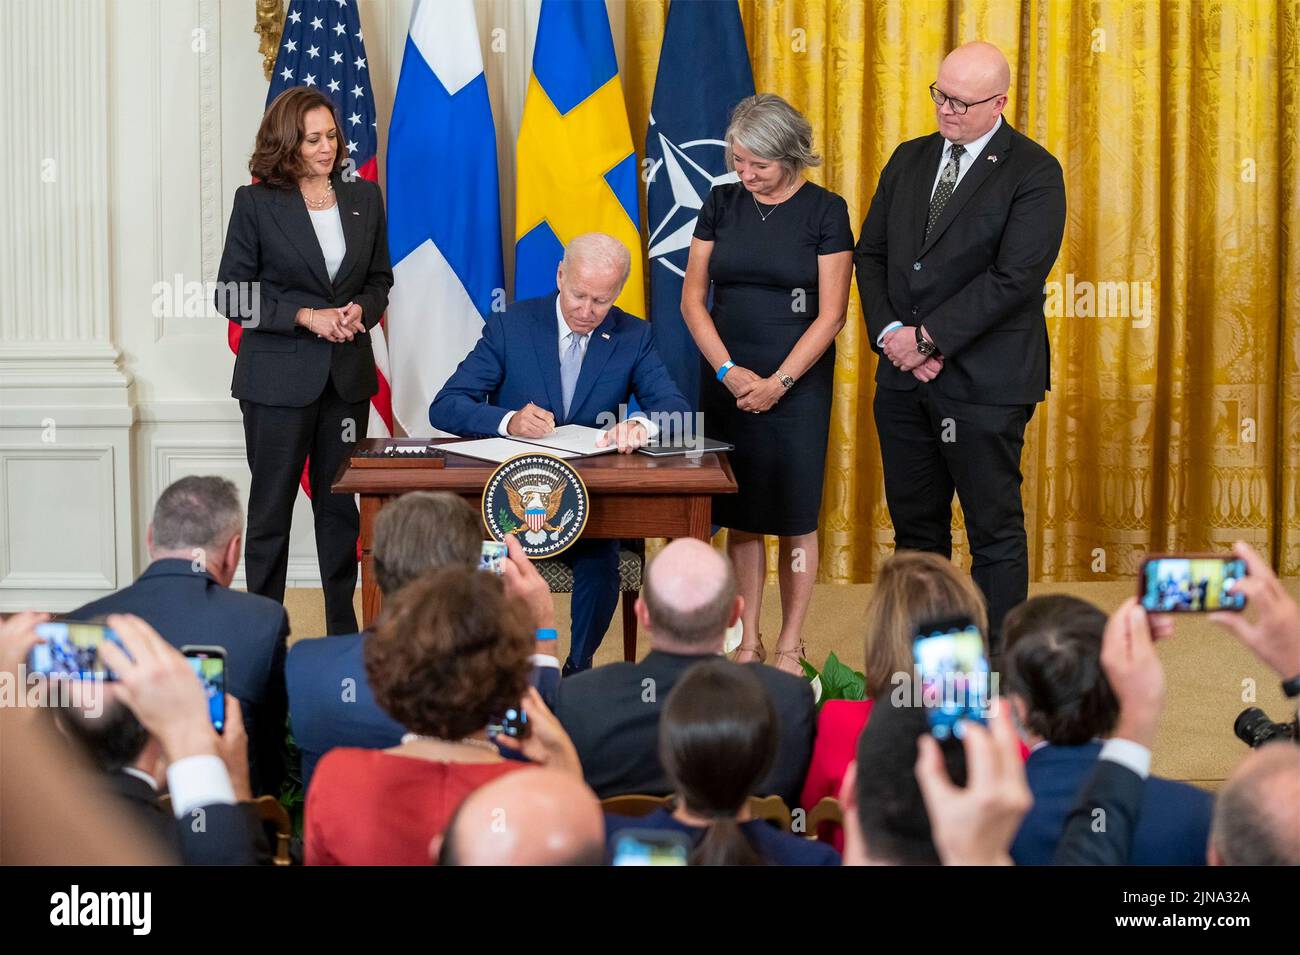 Washington, United States Of America. 09th Aug, 2022. Washington, United States of America. 09 August, 2022. U.S President Joe Biden, signs the Accession Protocols approving Sweden and Finland as the newest members of the North Atlantic Treaty Organization during a ceremony in the East Room of the White House August 9, 2022 in Washington, DC Standing left to right are: Vice President Kamala Harris, President Joe Biden, Swedish Amb. Karin Olofsdotter, and Finnish Amb. Mikko Hautala. Credit: Adam Schultz/White House Photo/Alamy Live News Stock Photo